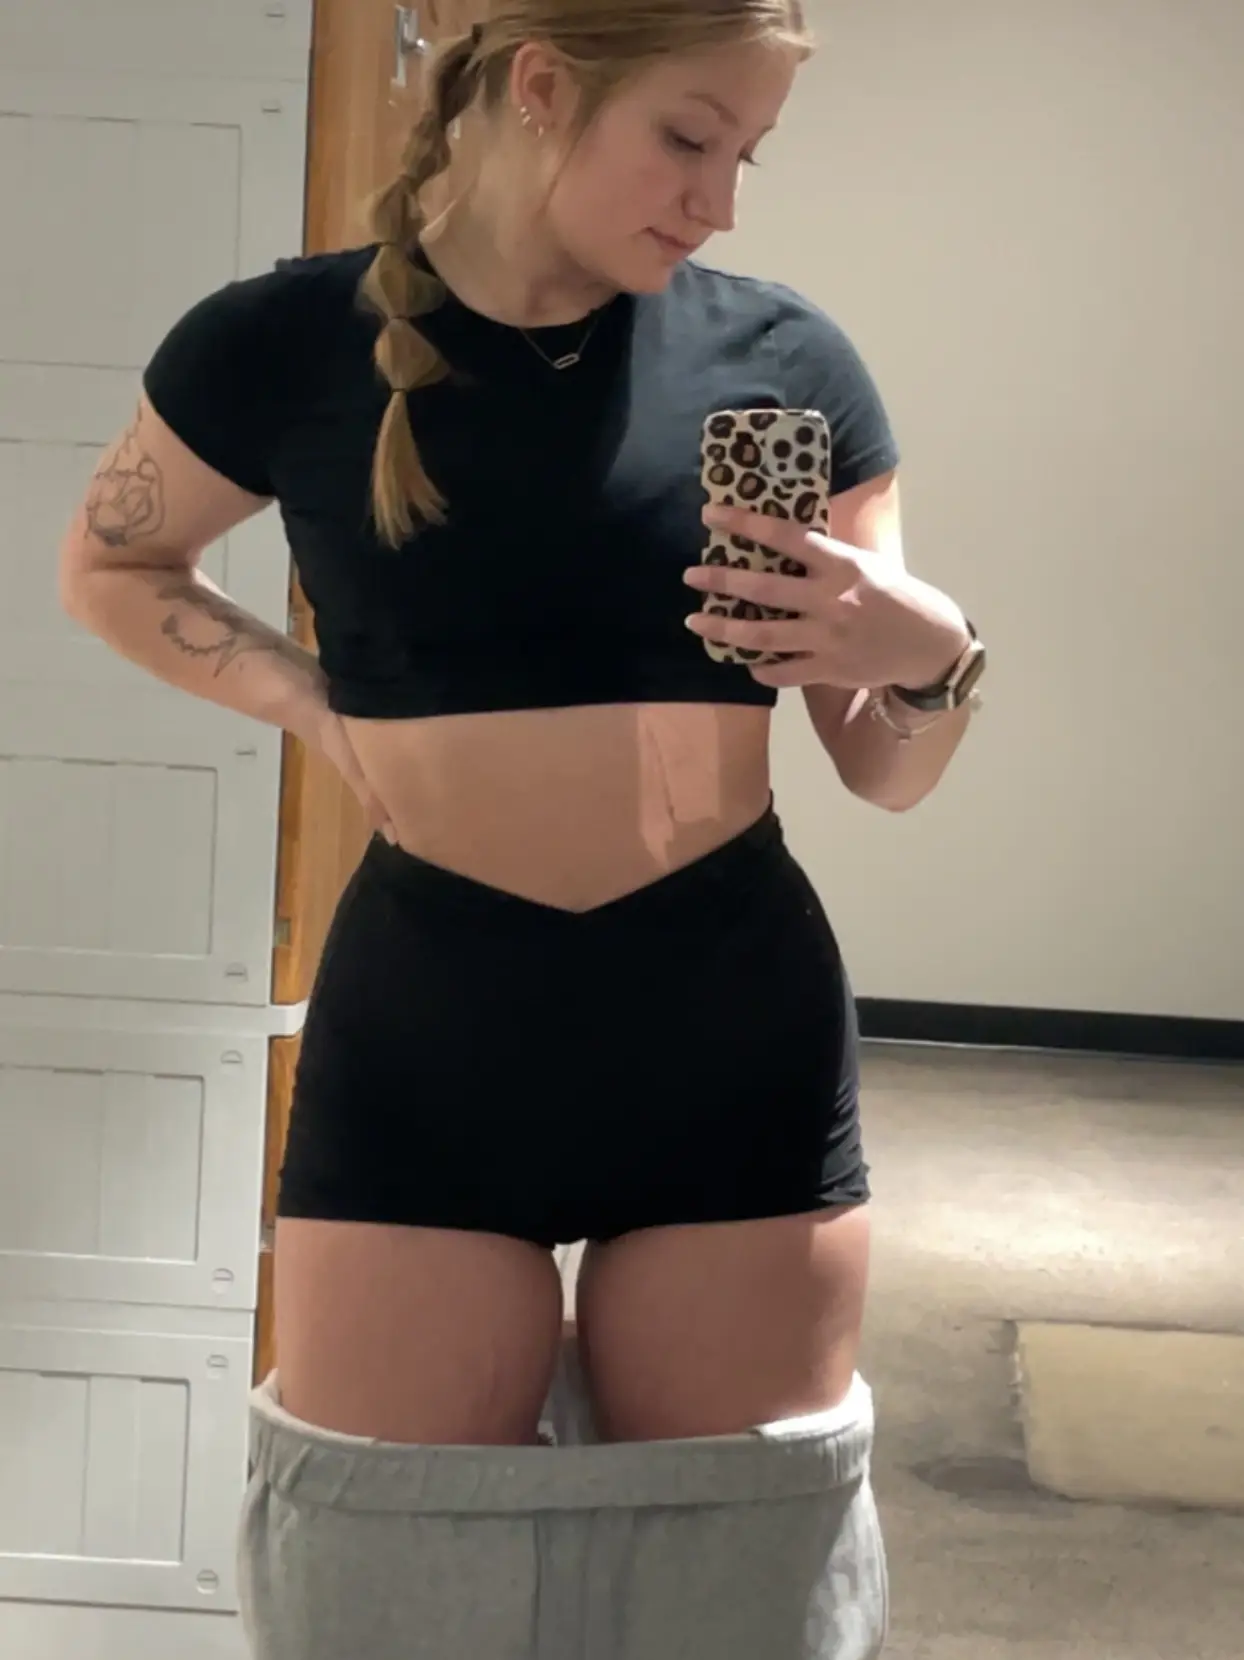 Gym Fits Recently, Gallery posted by Meggan Rae